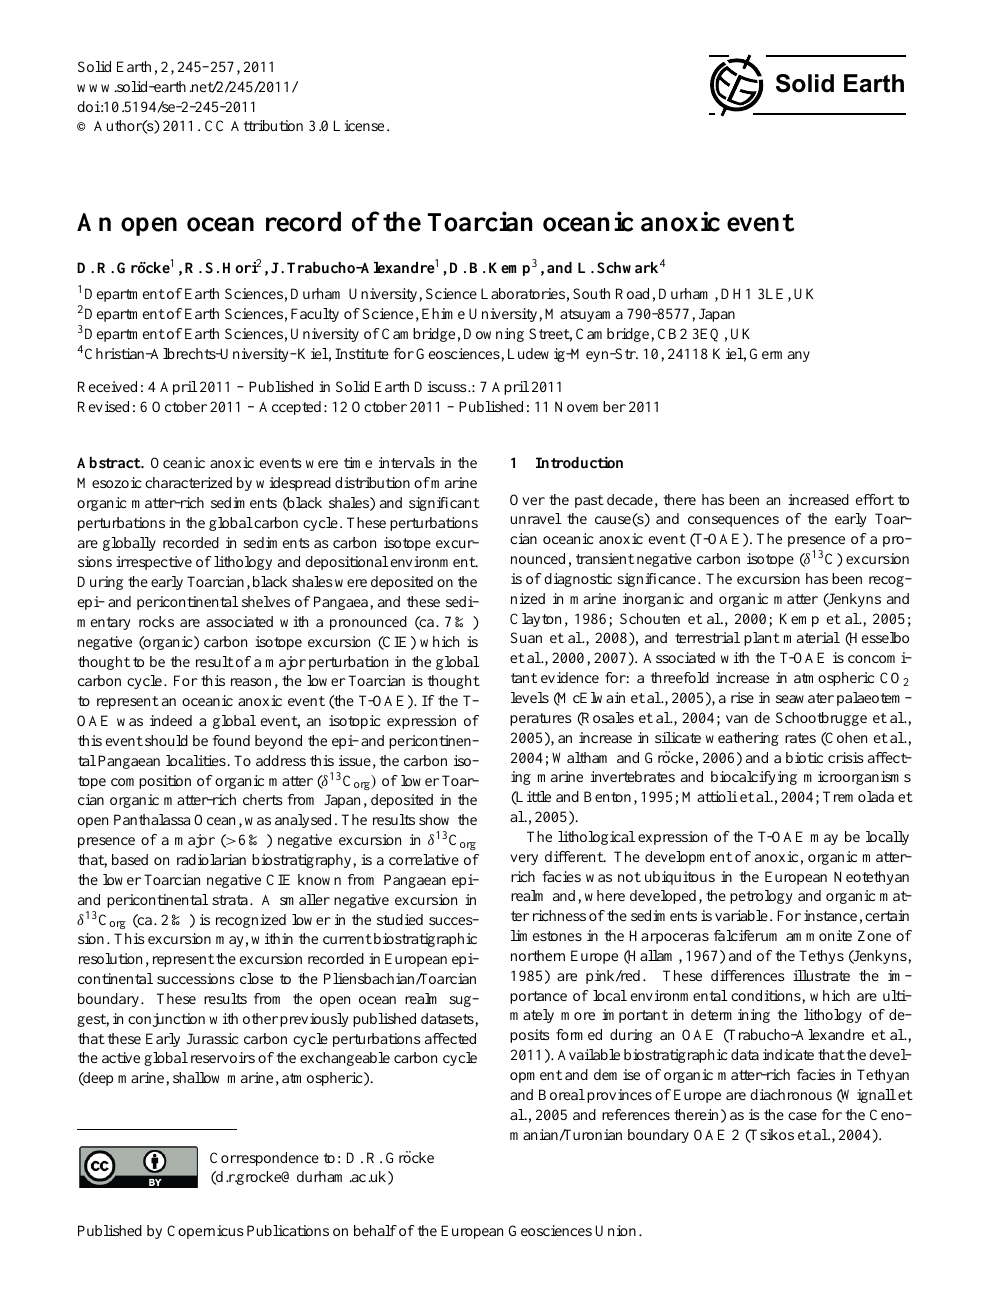 An Open Ocean Record Of The Toarcian Oceanic Anoxic Event - 